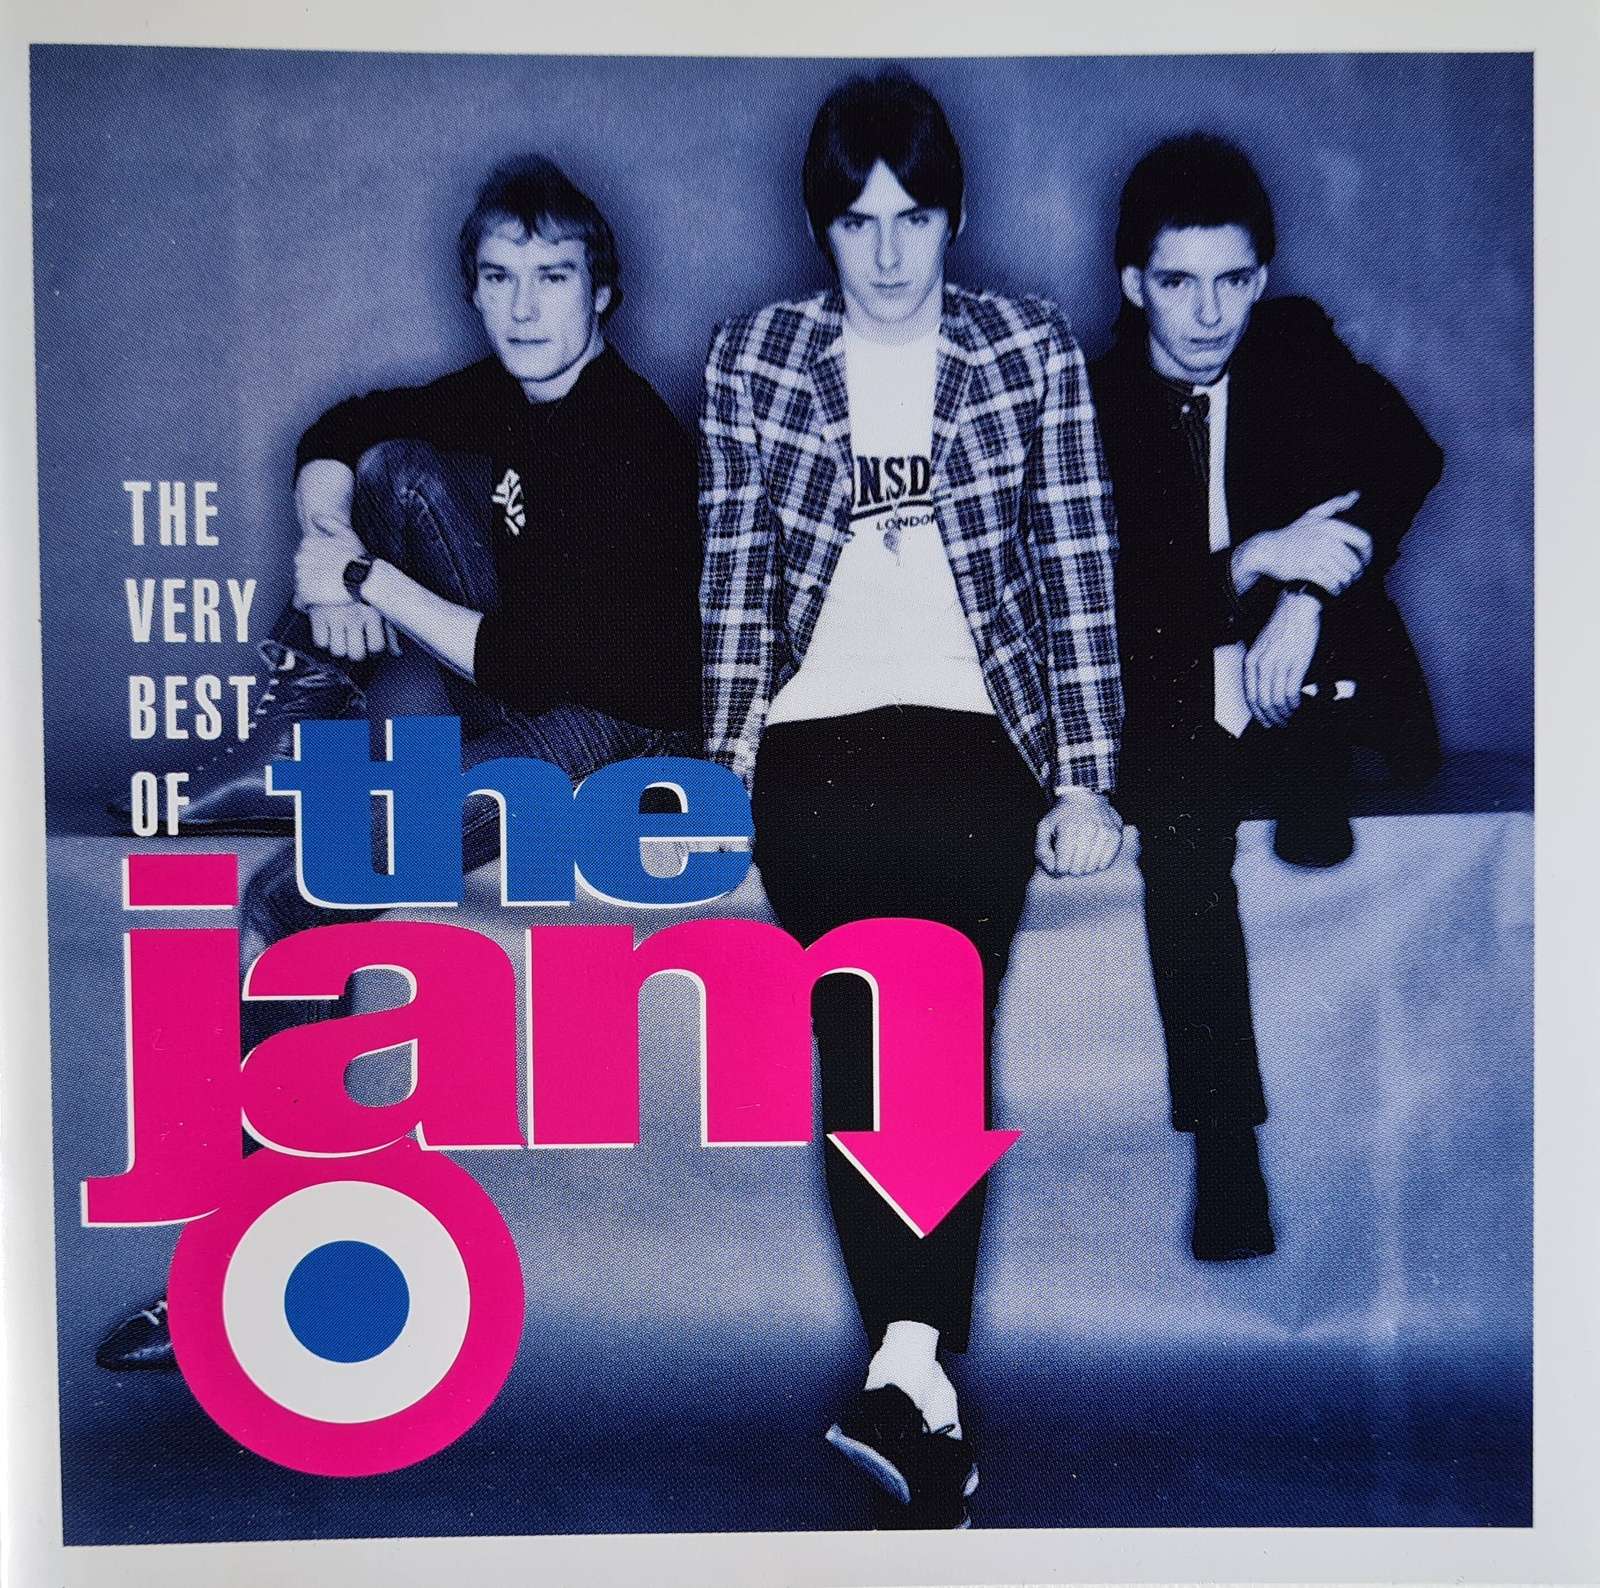 The Jam - The Very Best of The Jam (CD)